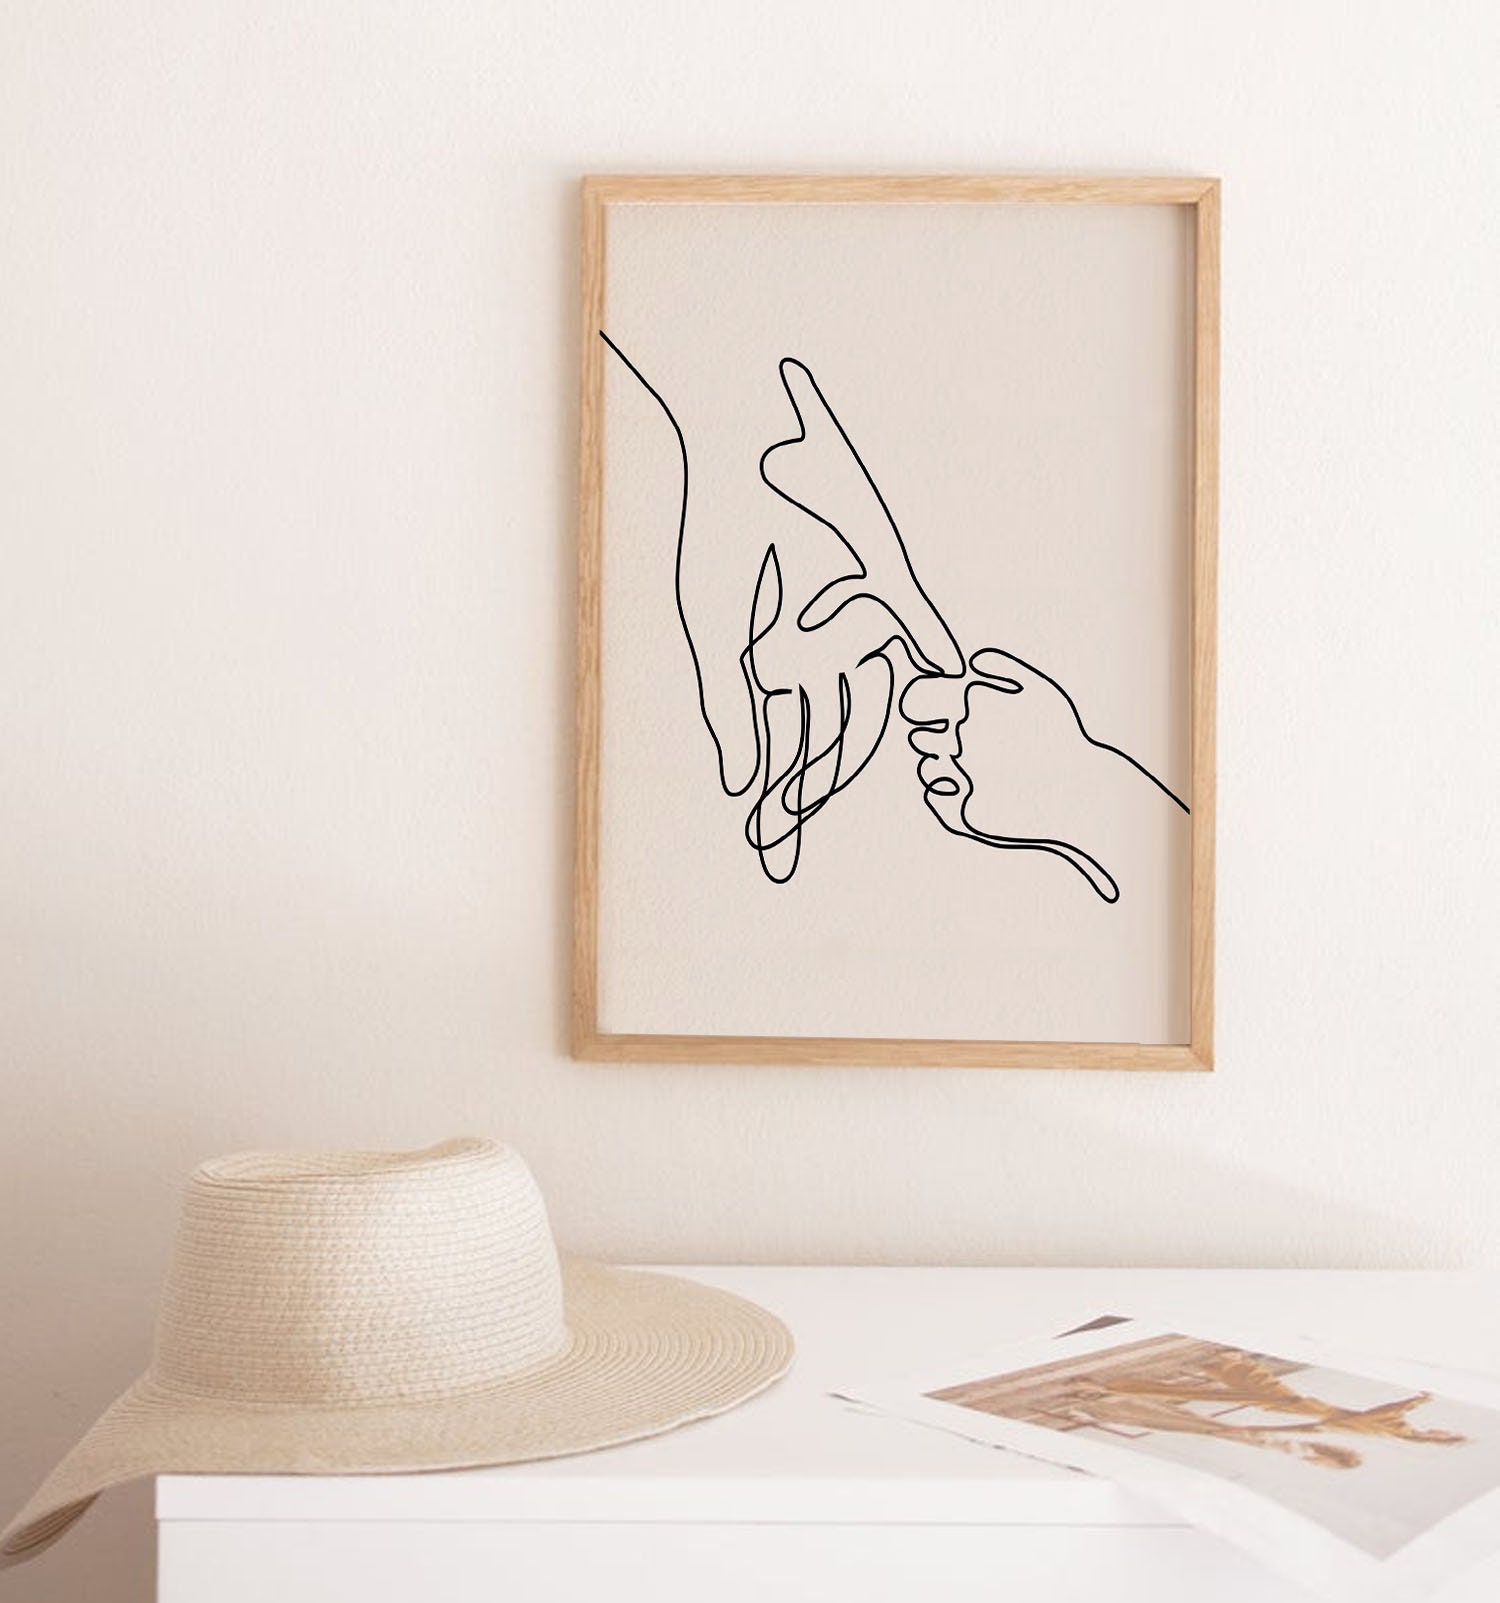 One Line Drawing Poster, Hands one line, Modern Minimalist Wall Art, Continuous Line